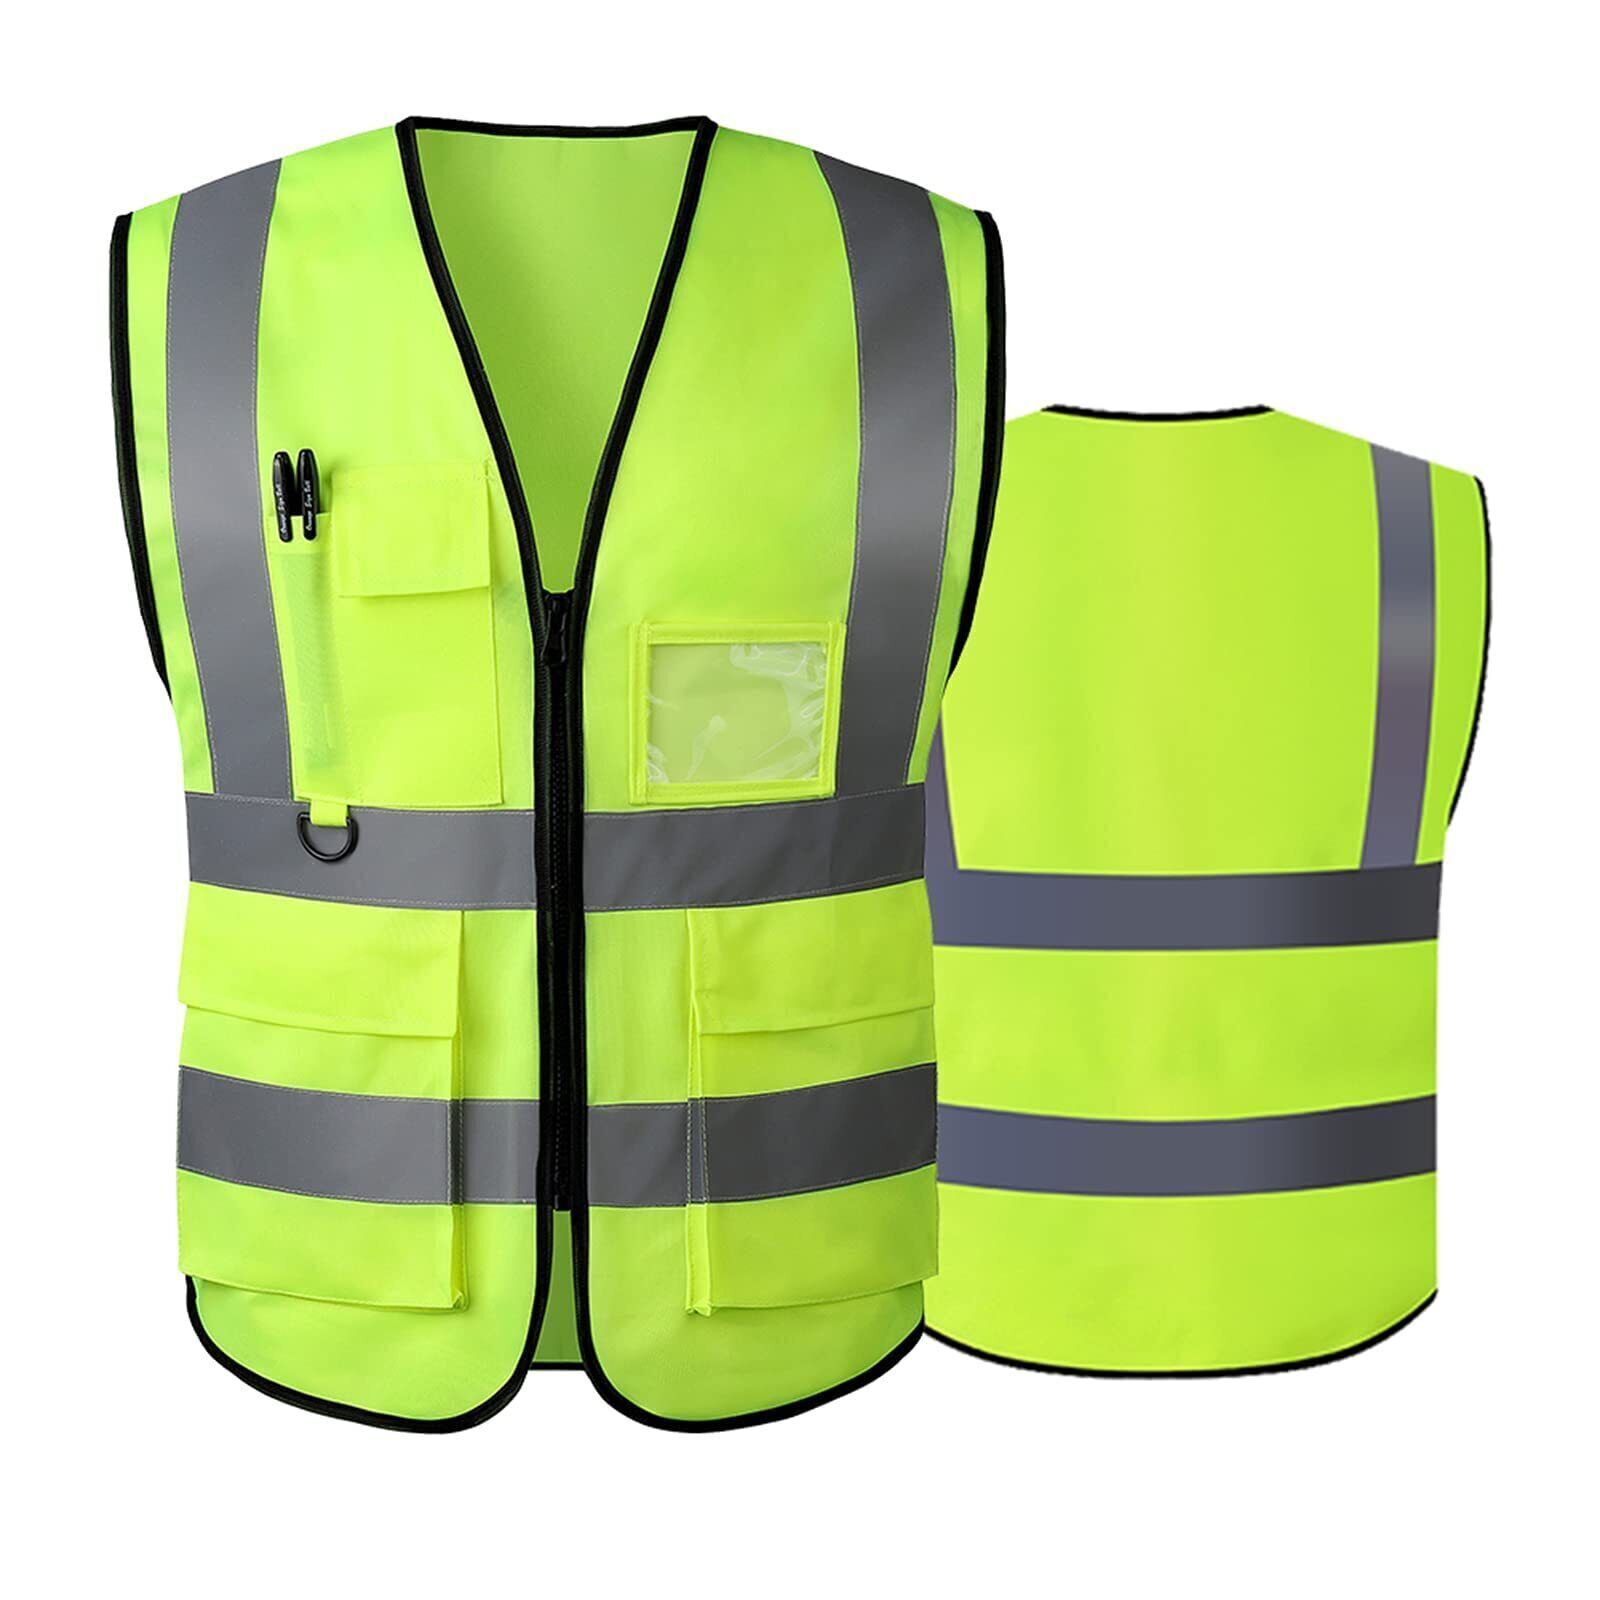 5 Pockets Safety Vest with High Visibility Reflective Stripes 2 Colors Security